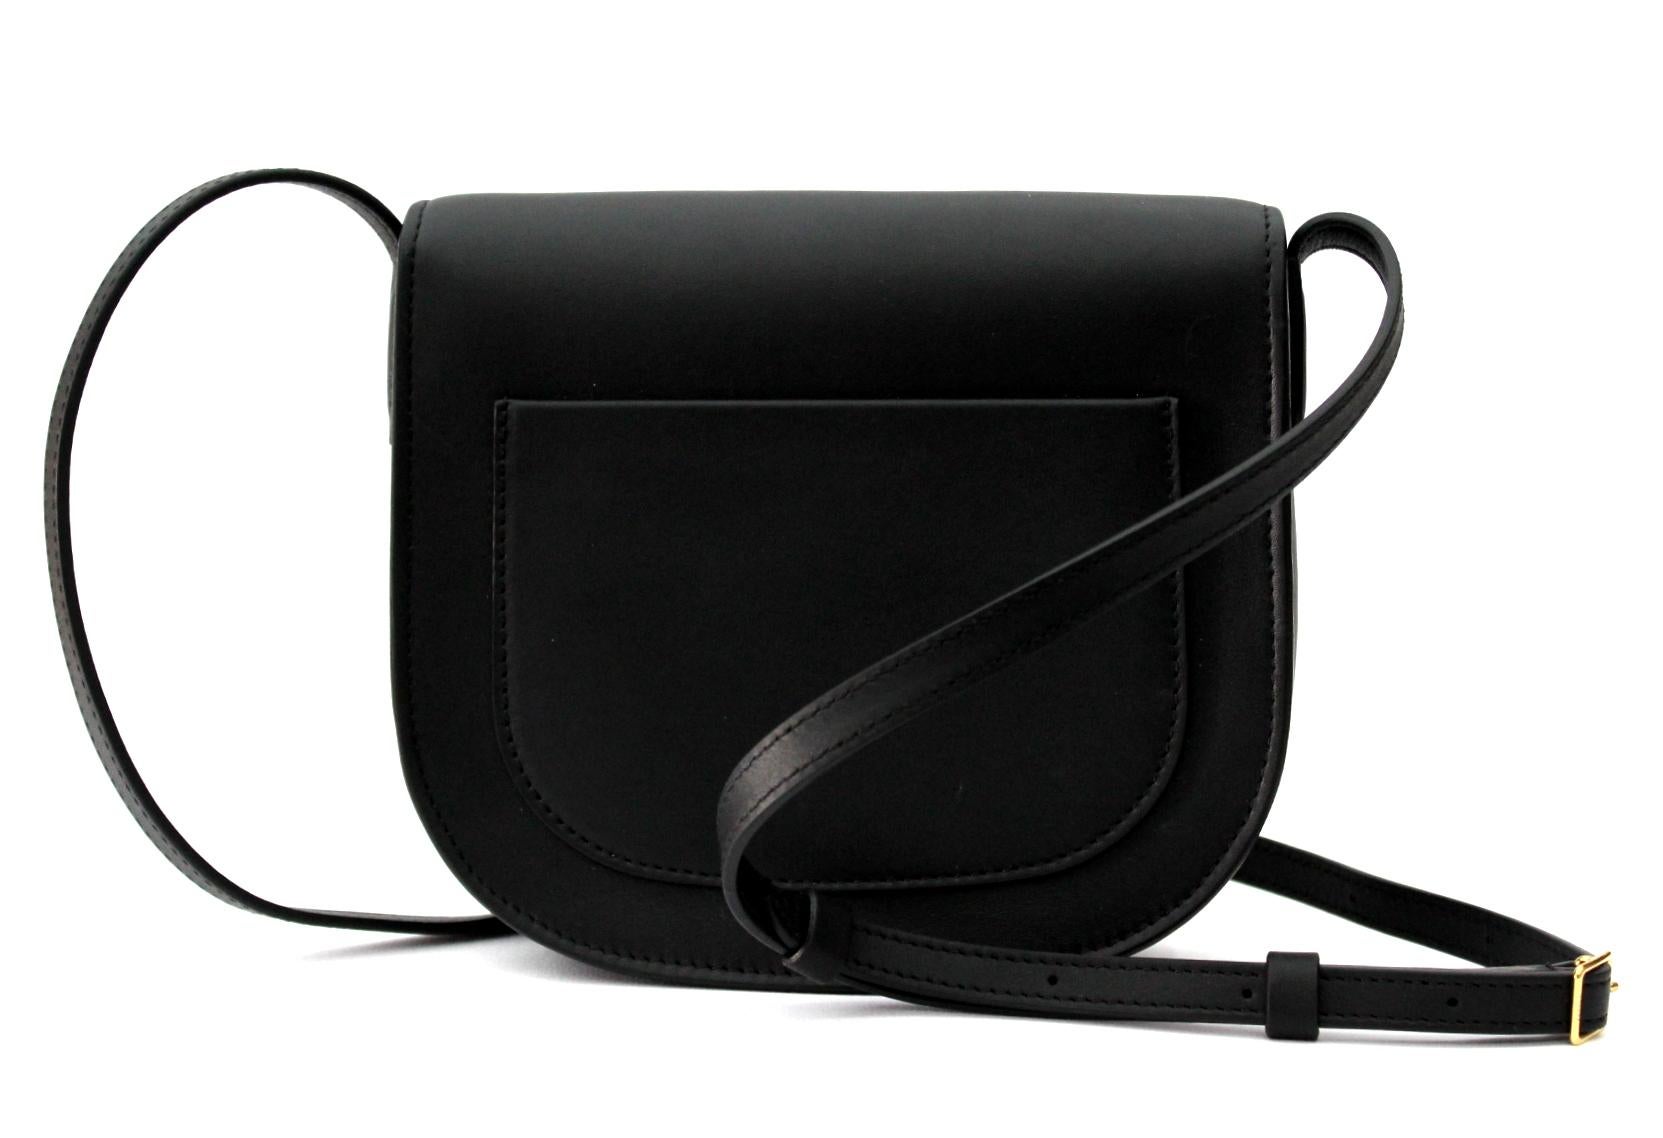 This beautiful Trotteur small bag in black Celine leather is the perfect city bag. It features a shoulder strap long adjustable and a cute shape in the shape of a saddle bag. The interior is perfect for containing the essentials.
Golden hook